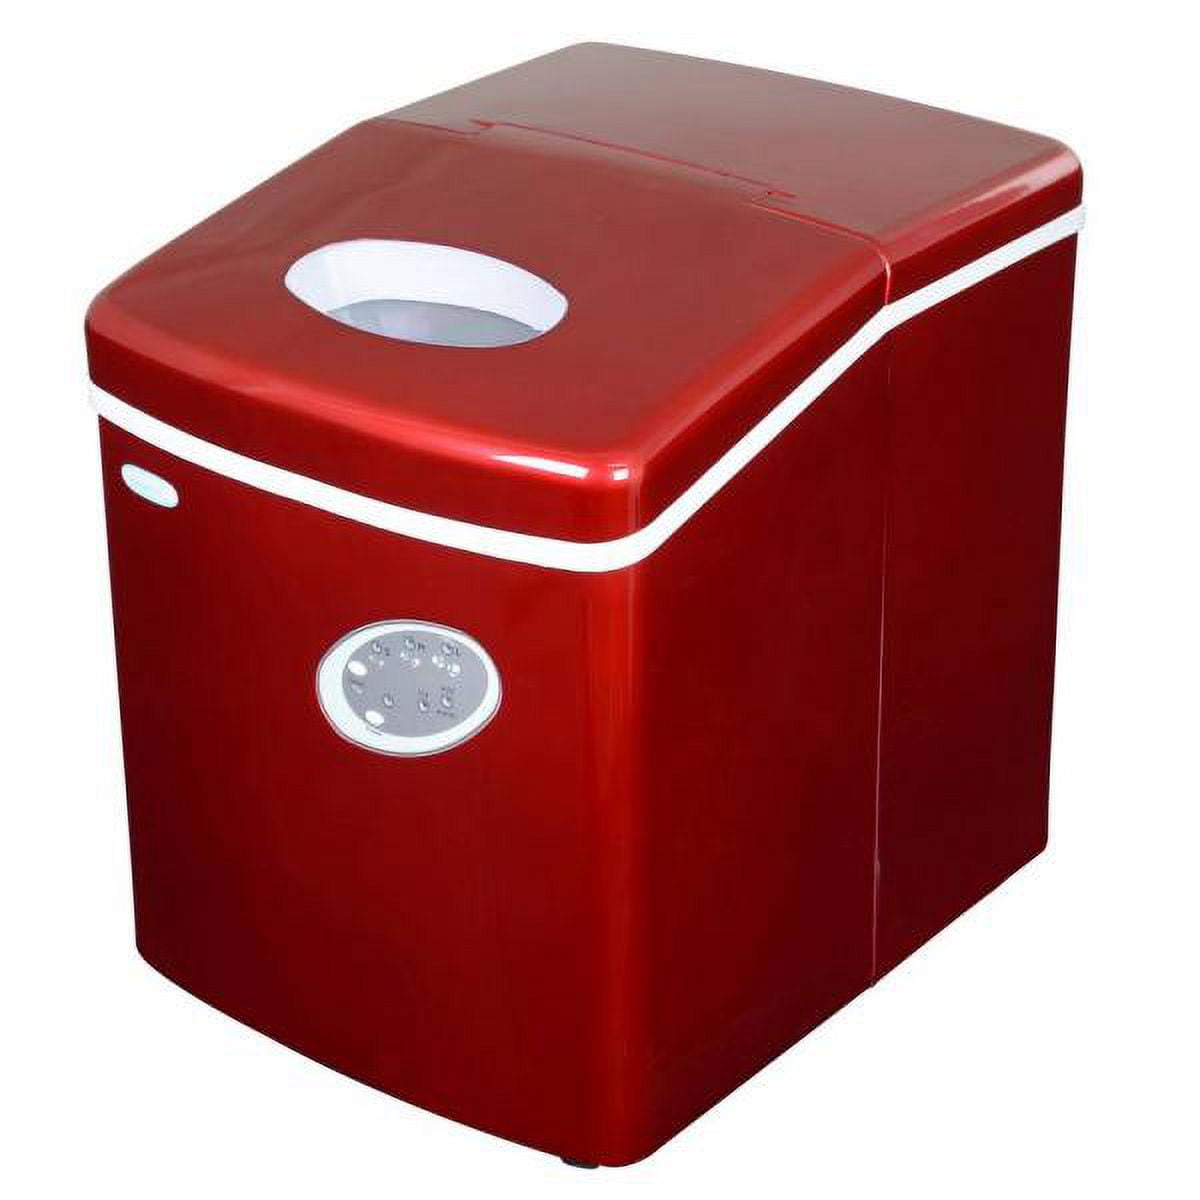 Newair AI-100SS 28lb Countertop Ice Maker for sale online